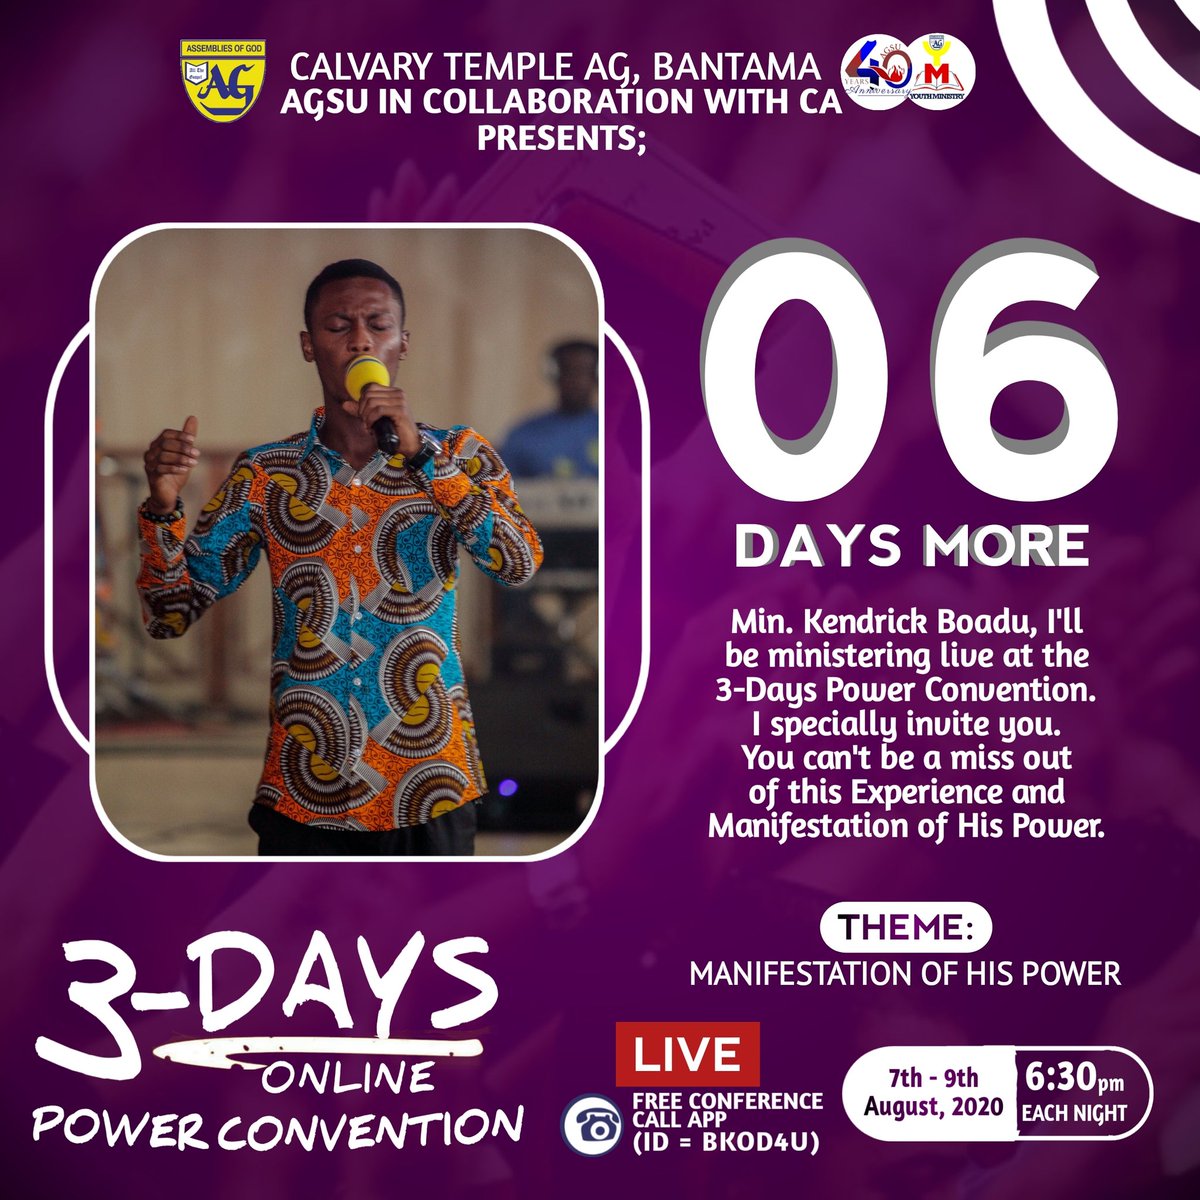 06 DAYS MORE🥳

3-DAYS POWER🔥 CONVENTION
Don't be a miss out😍

#PowerConvention
#ManifestationOfHisPower